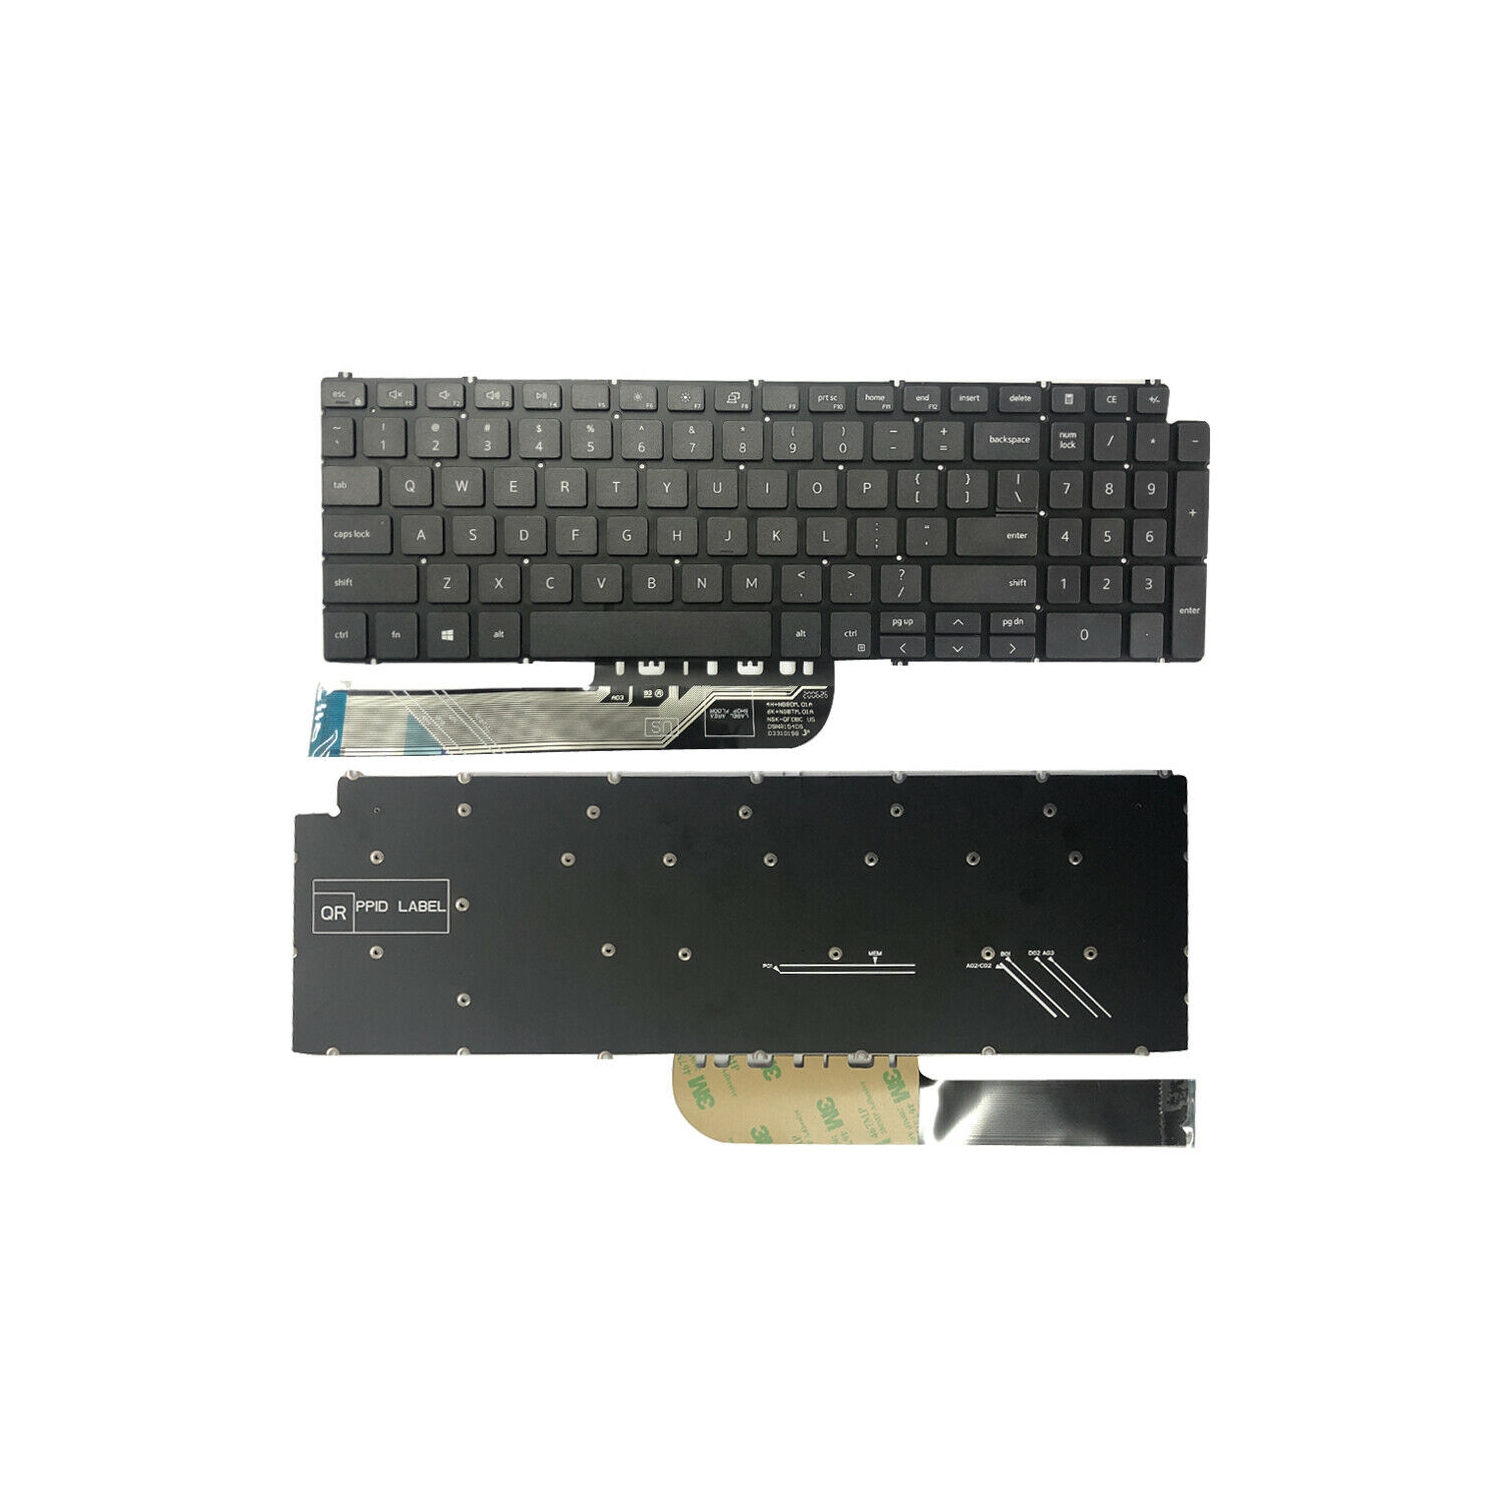 New keyboard for Dell Inspiron 15 5584 5590 5593 5594 5598 15 7000 2-IN-1 7590 7591 17 7000 2-IN-1 7791 17-7791 P42E P88F P90F Keyboard US NON Backlit Black